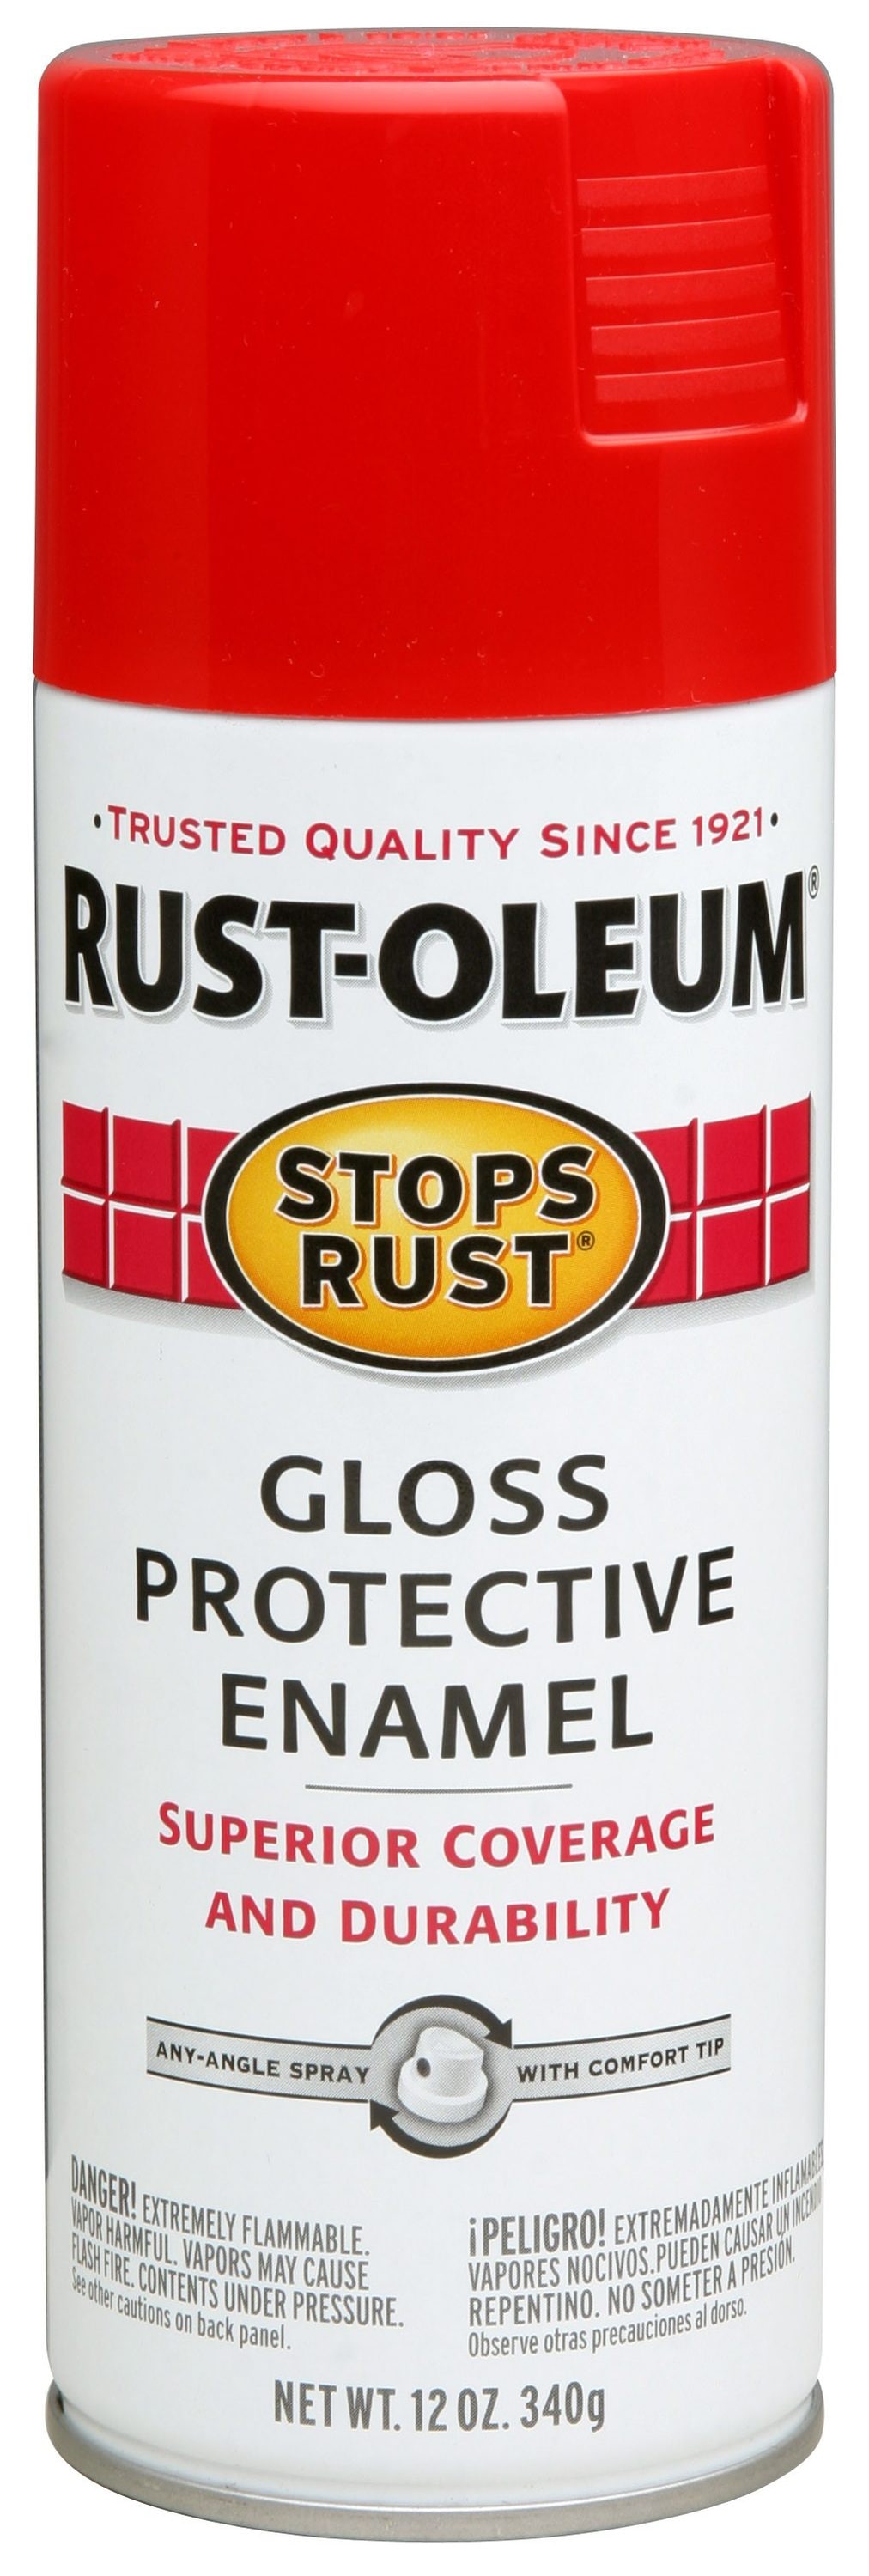 Rust-Oleum Enamel Spray Paint: Tan, Gloss, 15 oz - Outdoor, Use on Equipment, General Plant Maintece, Handrails, Machinery & STRUCTURAL Steel, 50 to